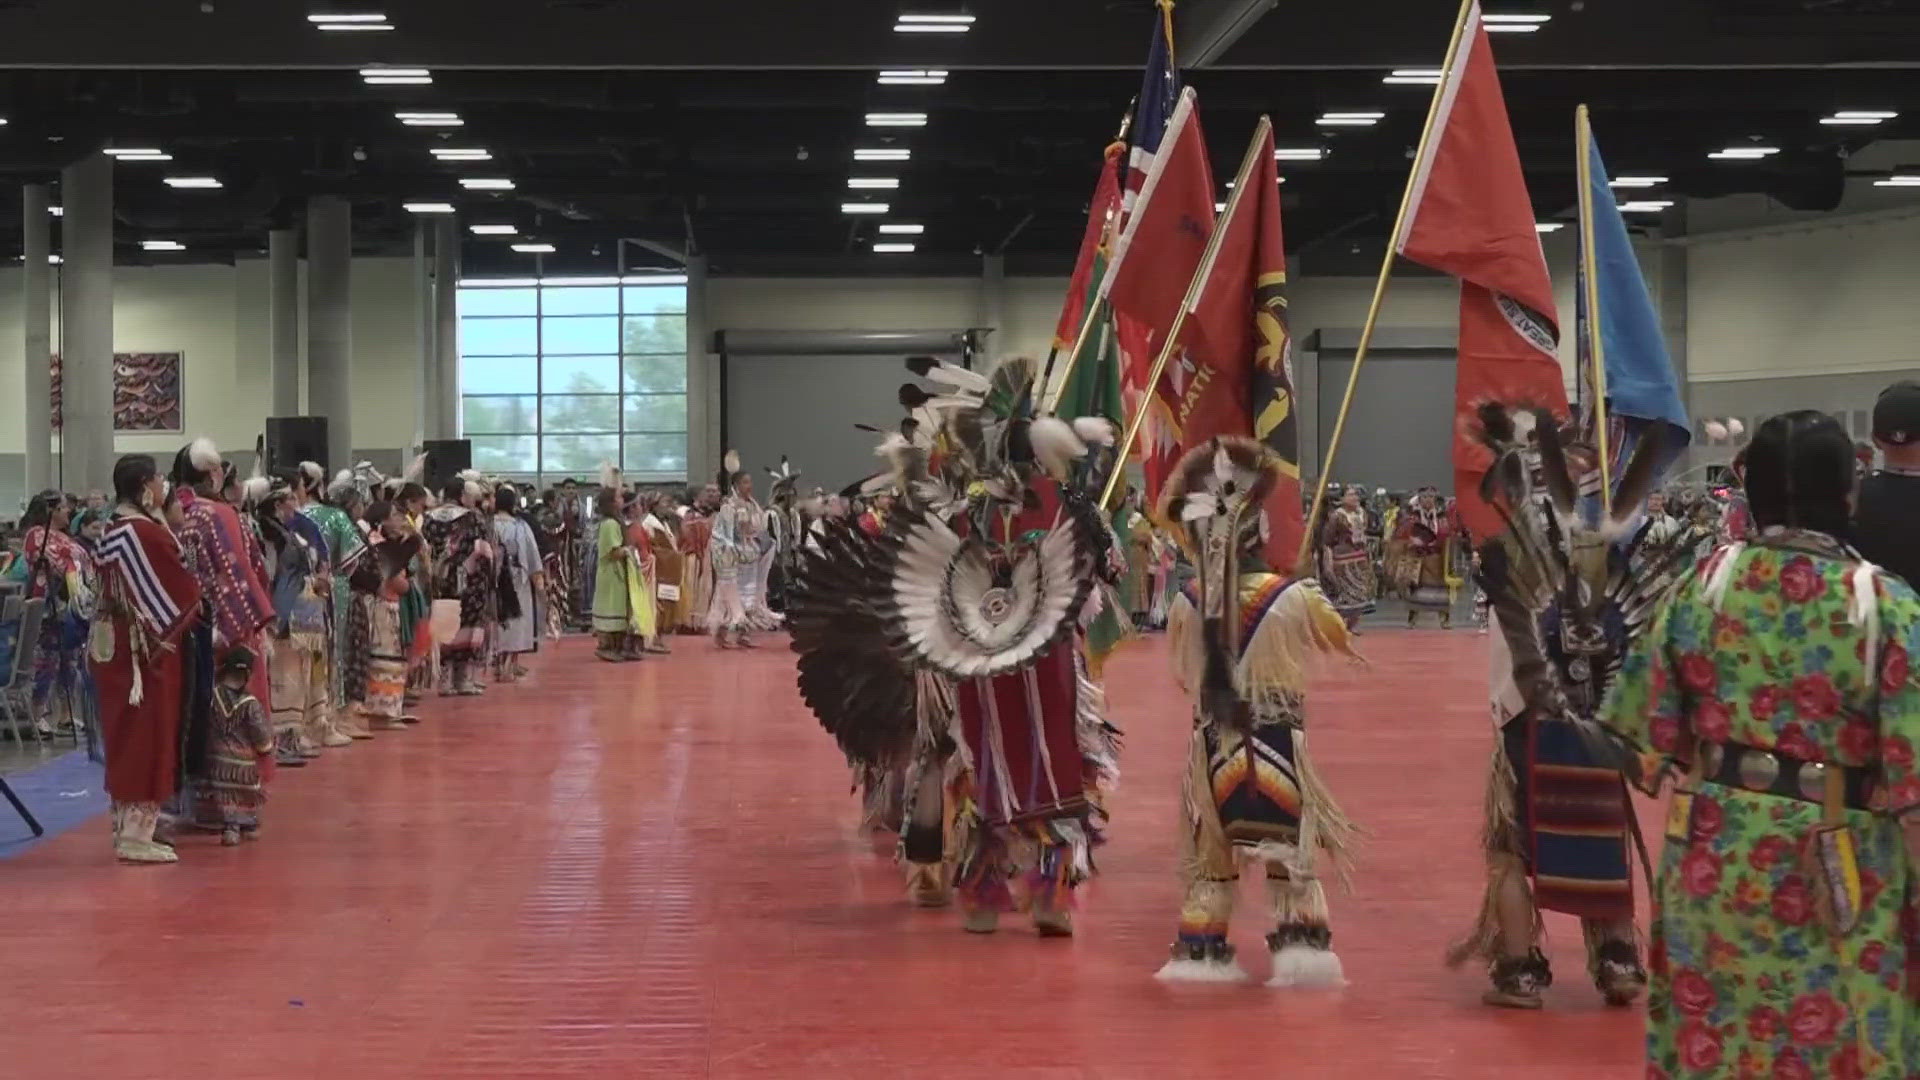 Hundreds of tribal community members came together to celebrate the 50th anniversary of Expo '74. Events included traditional tribal ceremonies and dances.